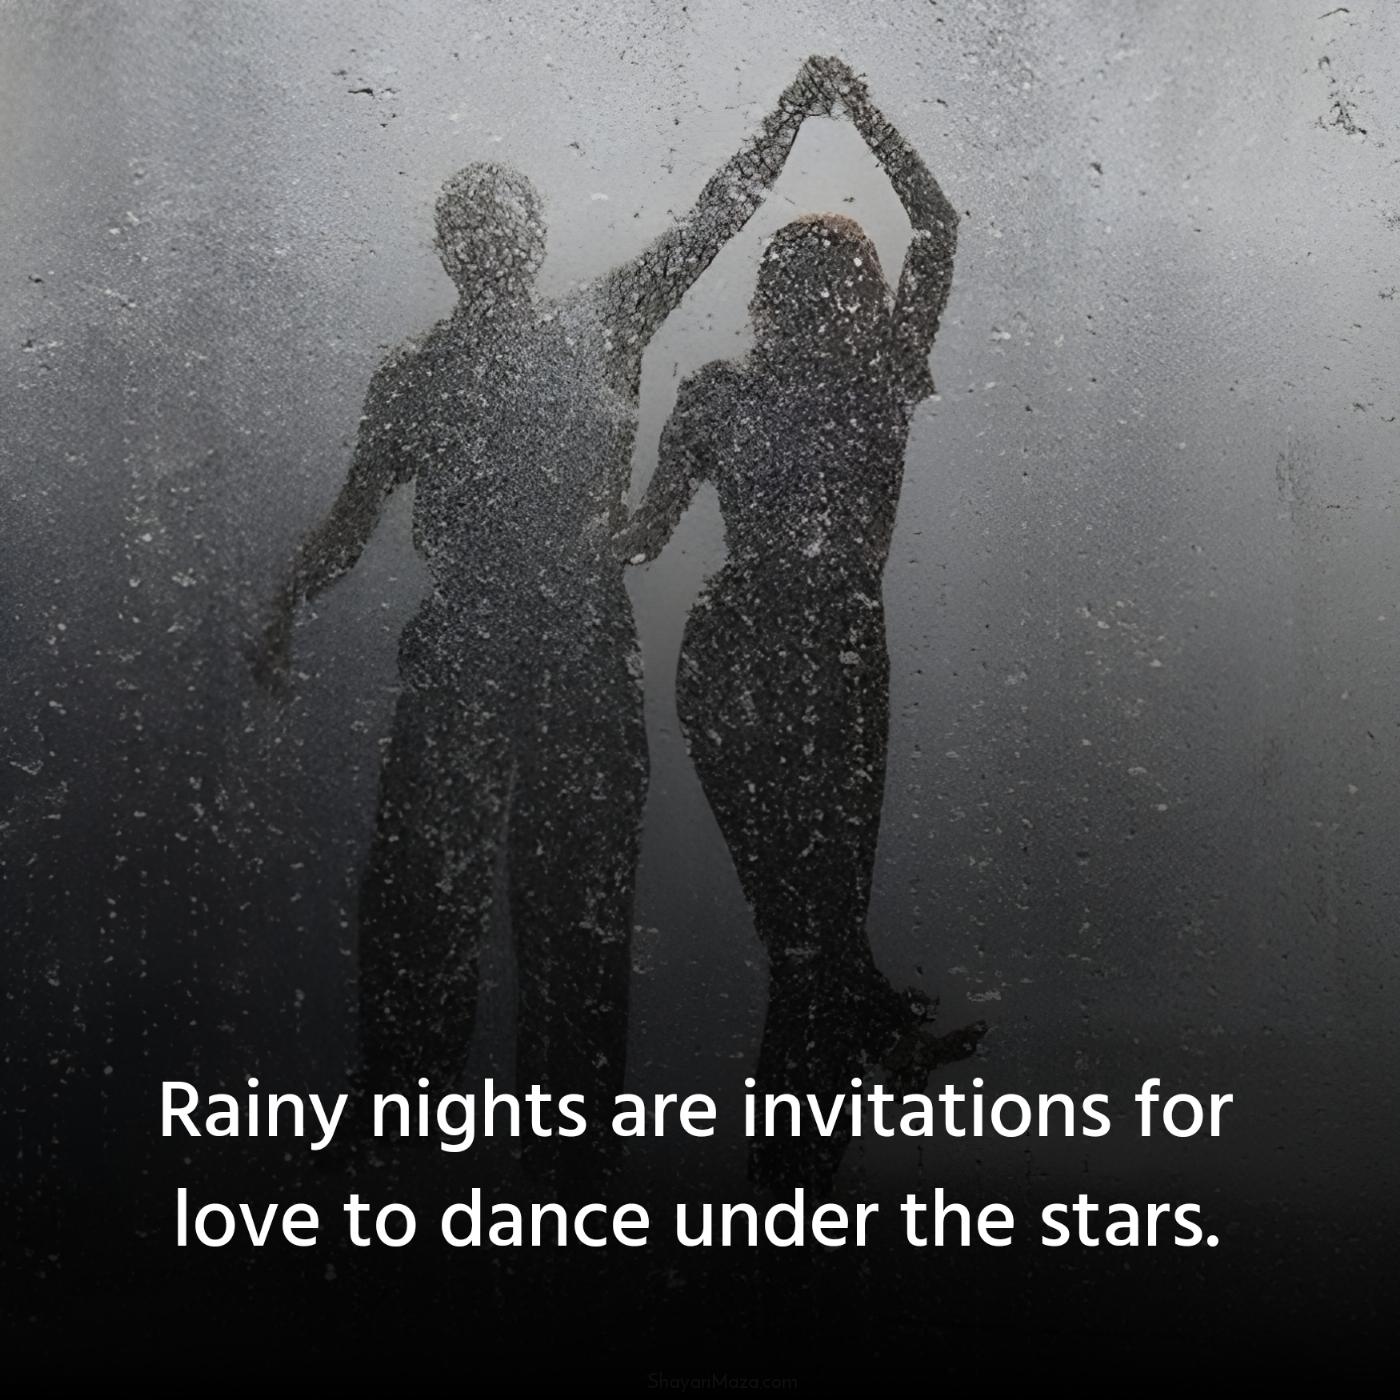 Rainy nights are invitations for love to dance under the stars